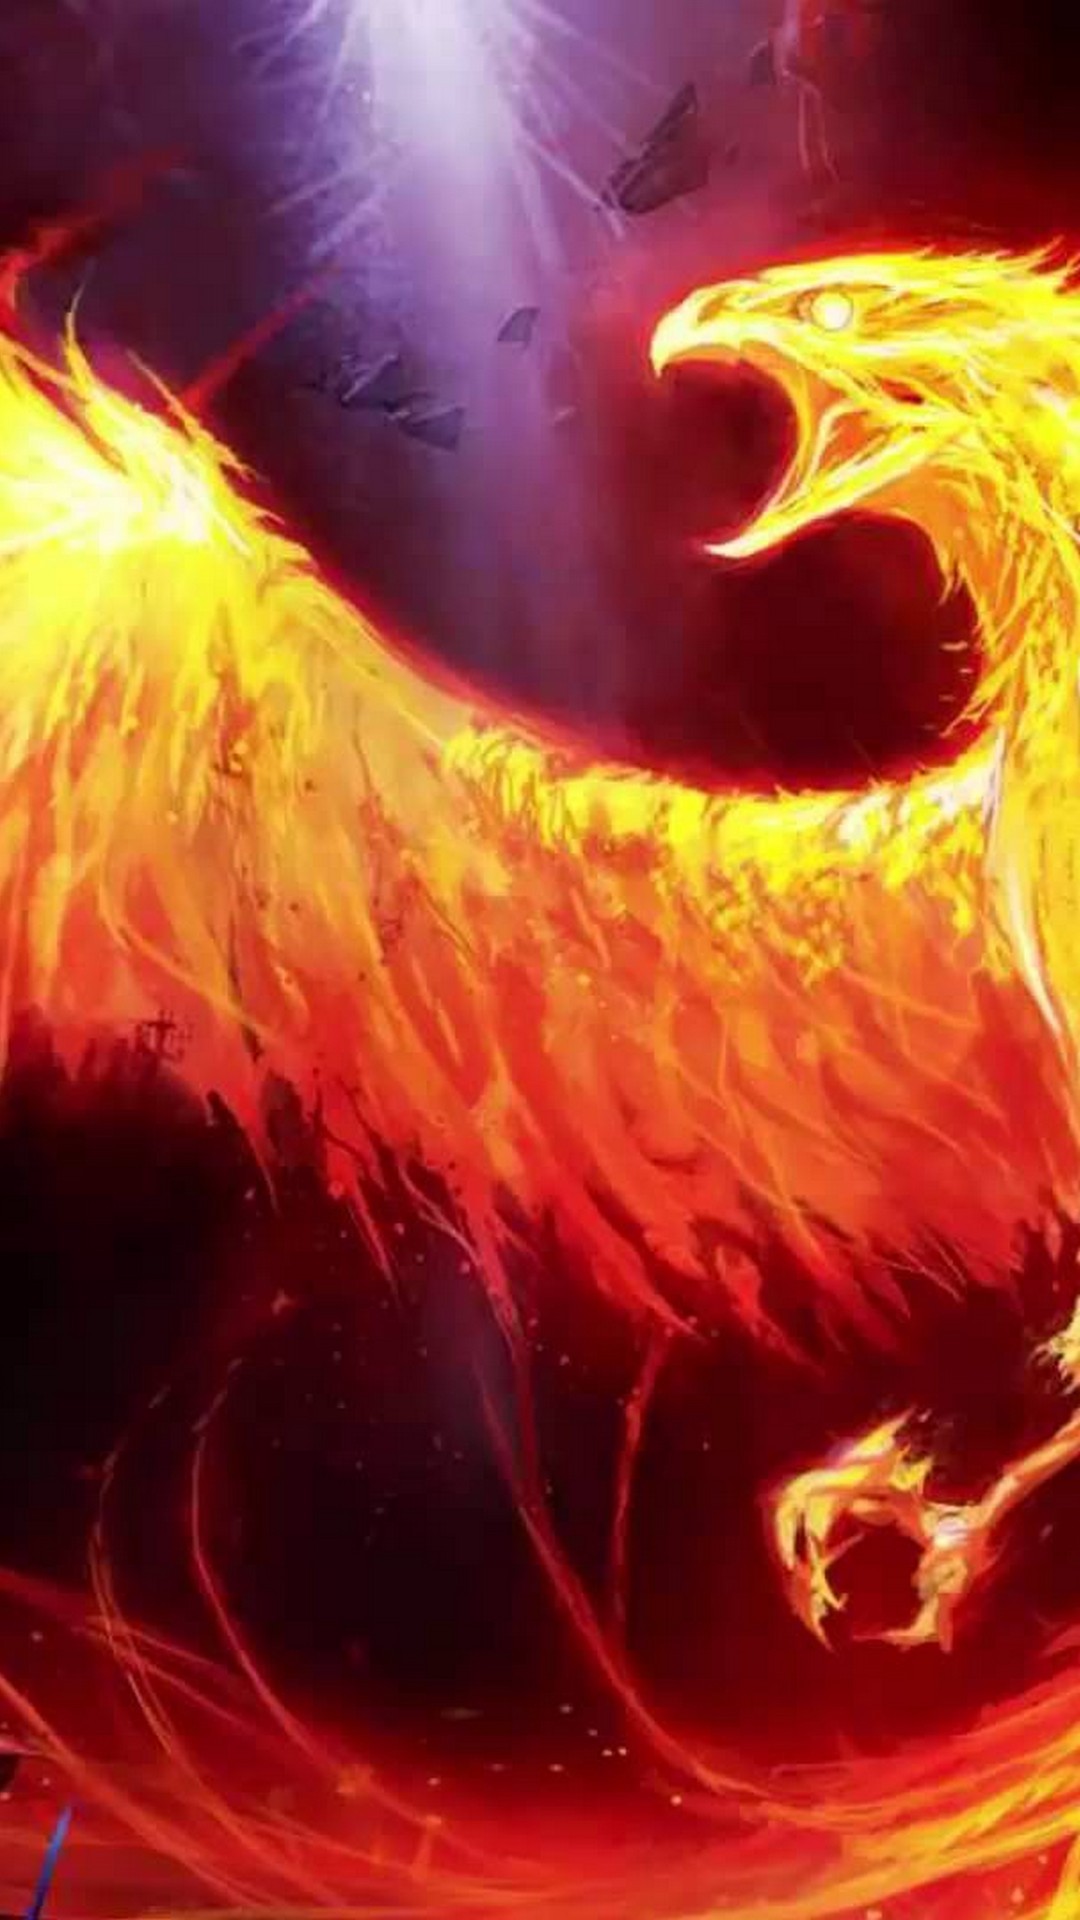 Android Wallpaper HD Phoenix with image resolution 1080x1920 pixel. You can make this wallpaper for your Android backgrounds, Tablet, Smartphones Screensavers and Mobile Phone Lock Screen